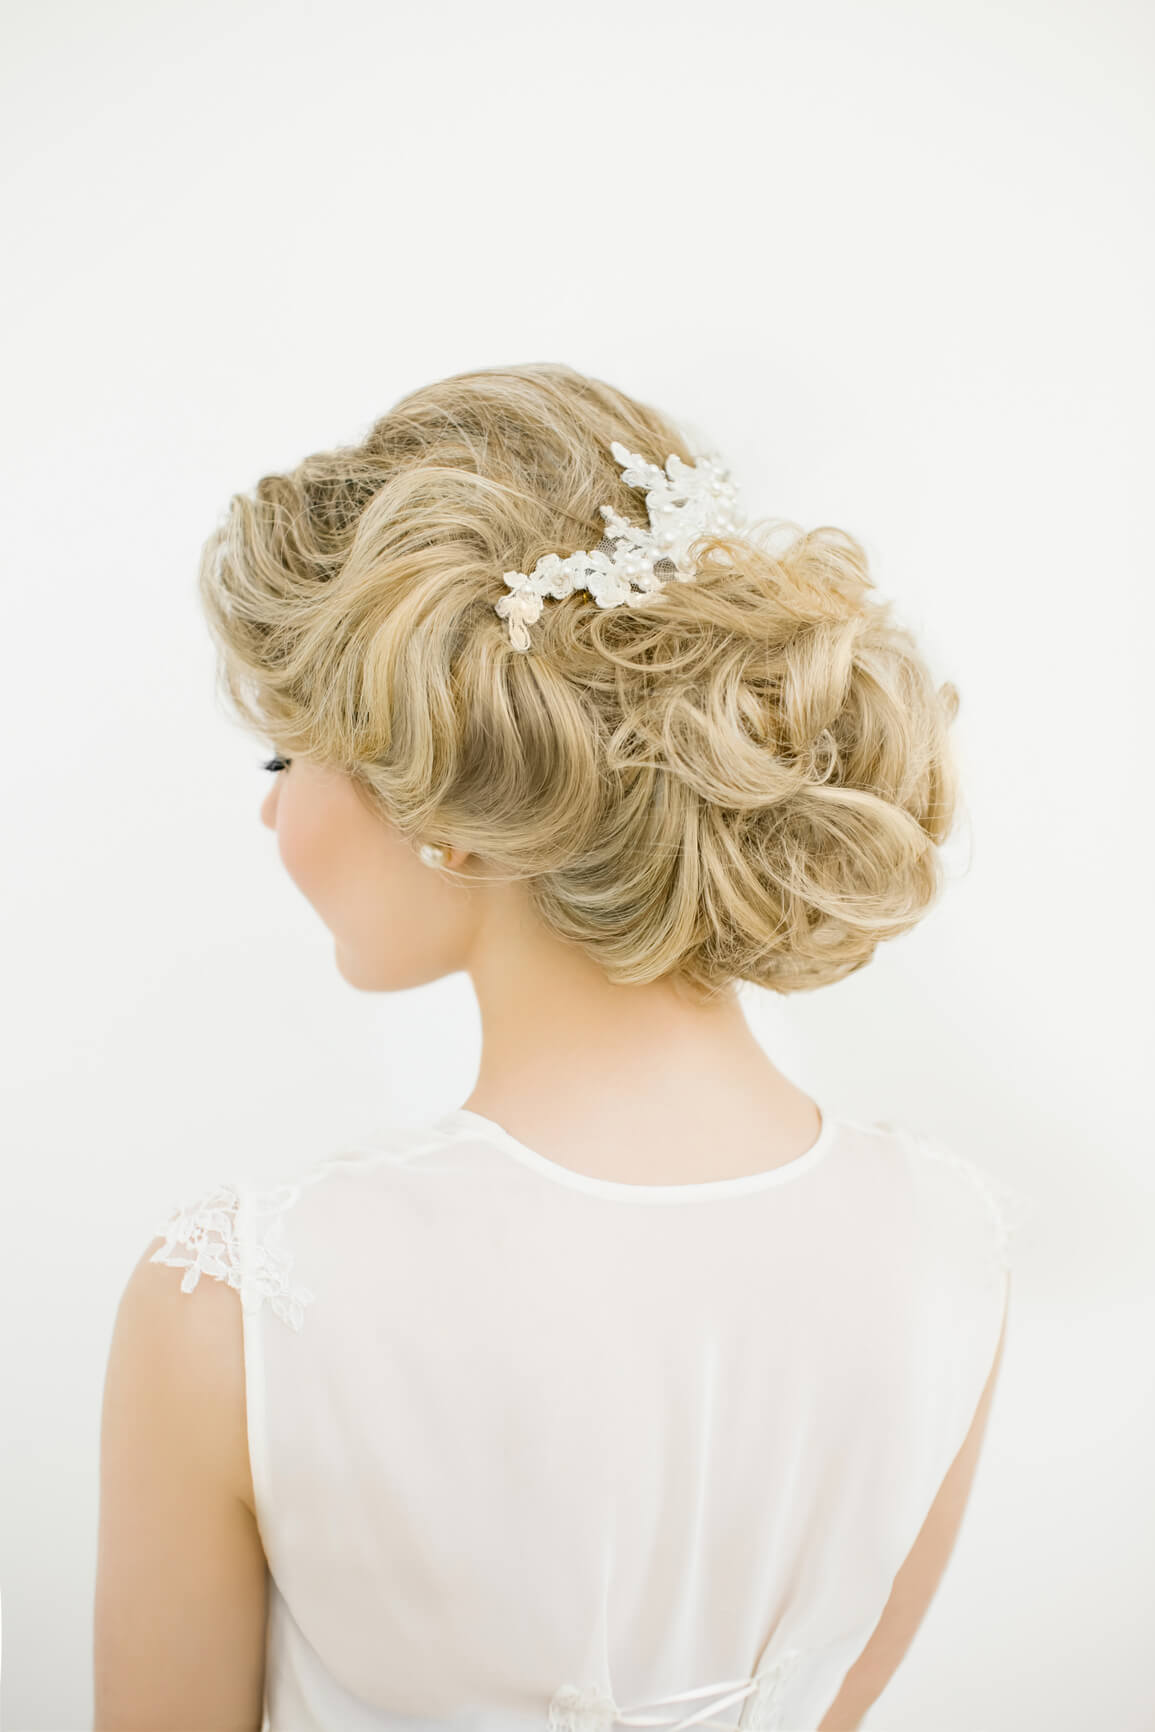 40 Perfete Wedding Hairstyles You Should Totally Recreate - Perfete